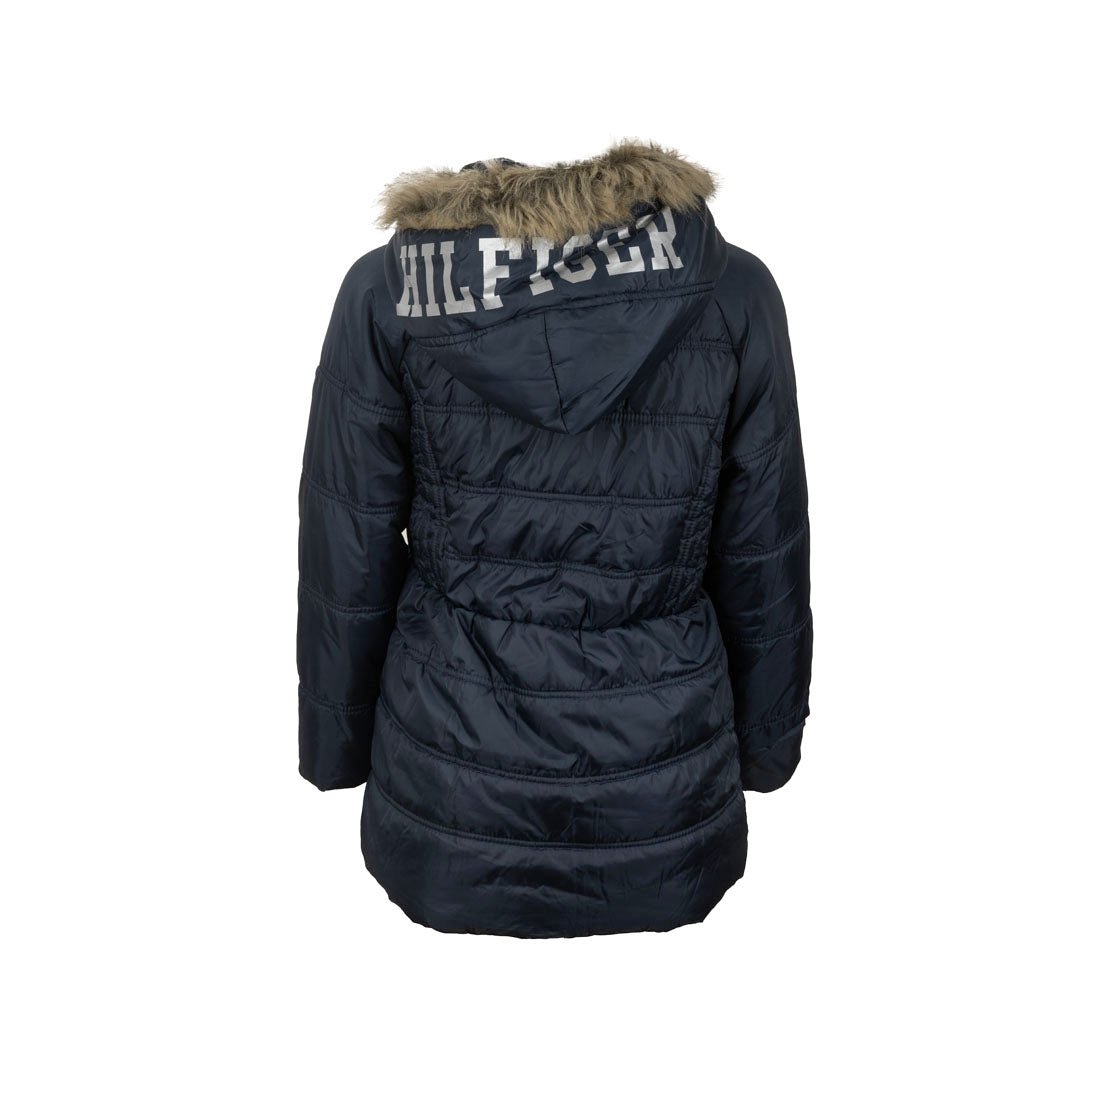 Tommy Hilfiger Brand New Waterproof Jacket For Boys - mymadstore.com